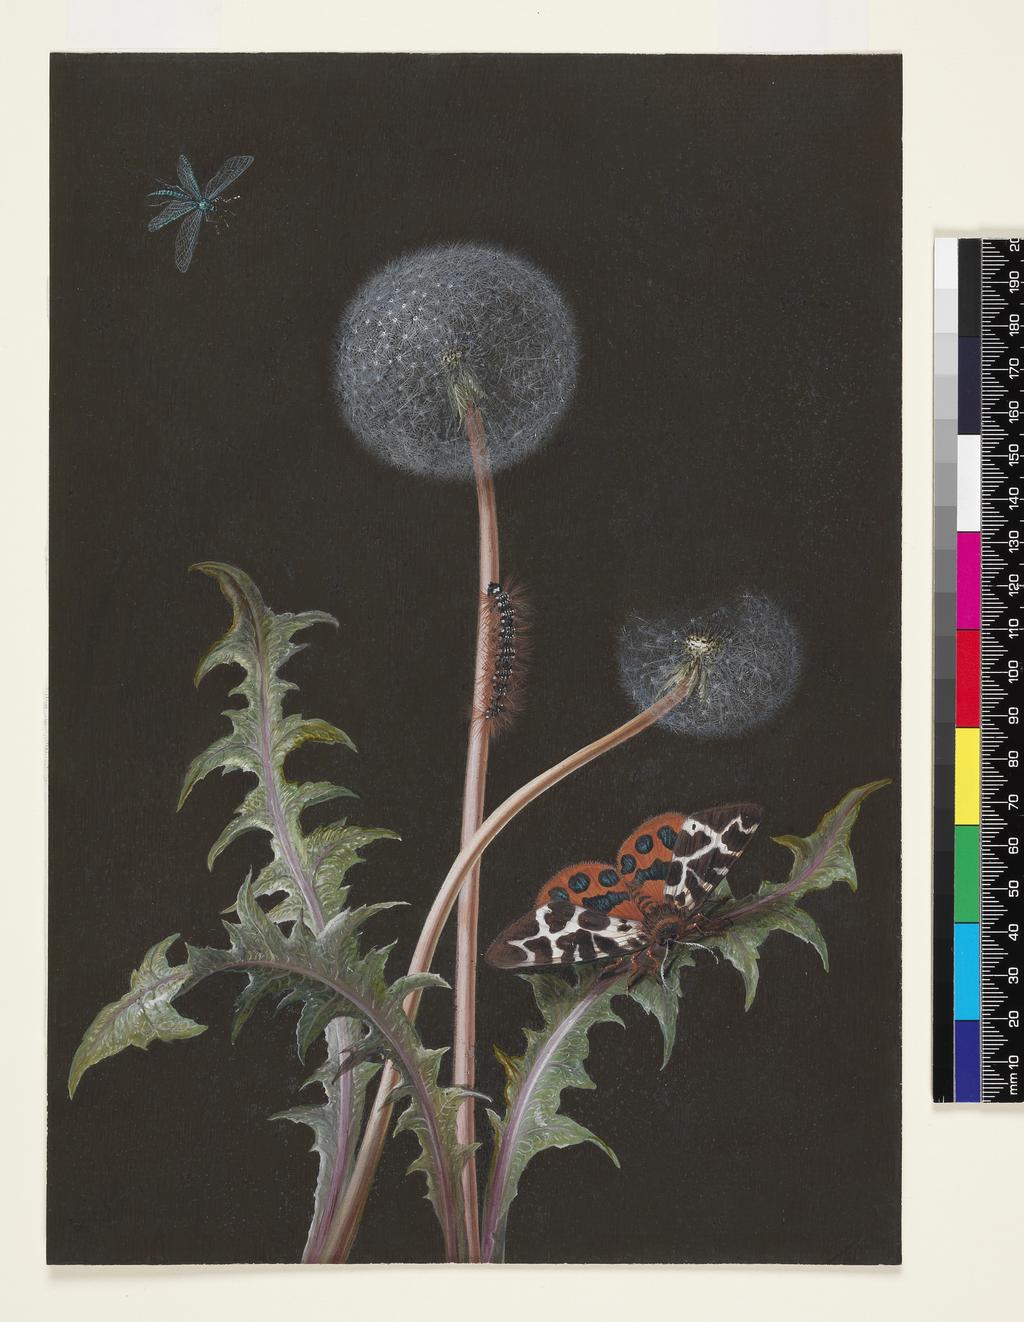 An image of Taraxacum Officinale. Dietzsch, Margaretha Barbara (German, 1716-1795). Watercolour, bodycolour and gum Arabic on prepared light brown ground on vellum, height 280 mm, width 198 mm. Related Object: PD.379-1973 - Mauve Stock.